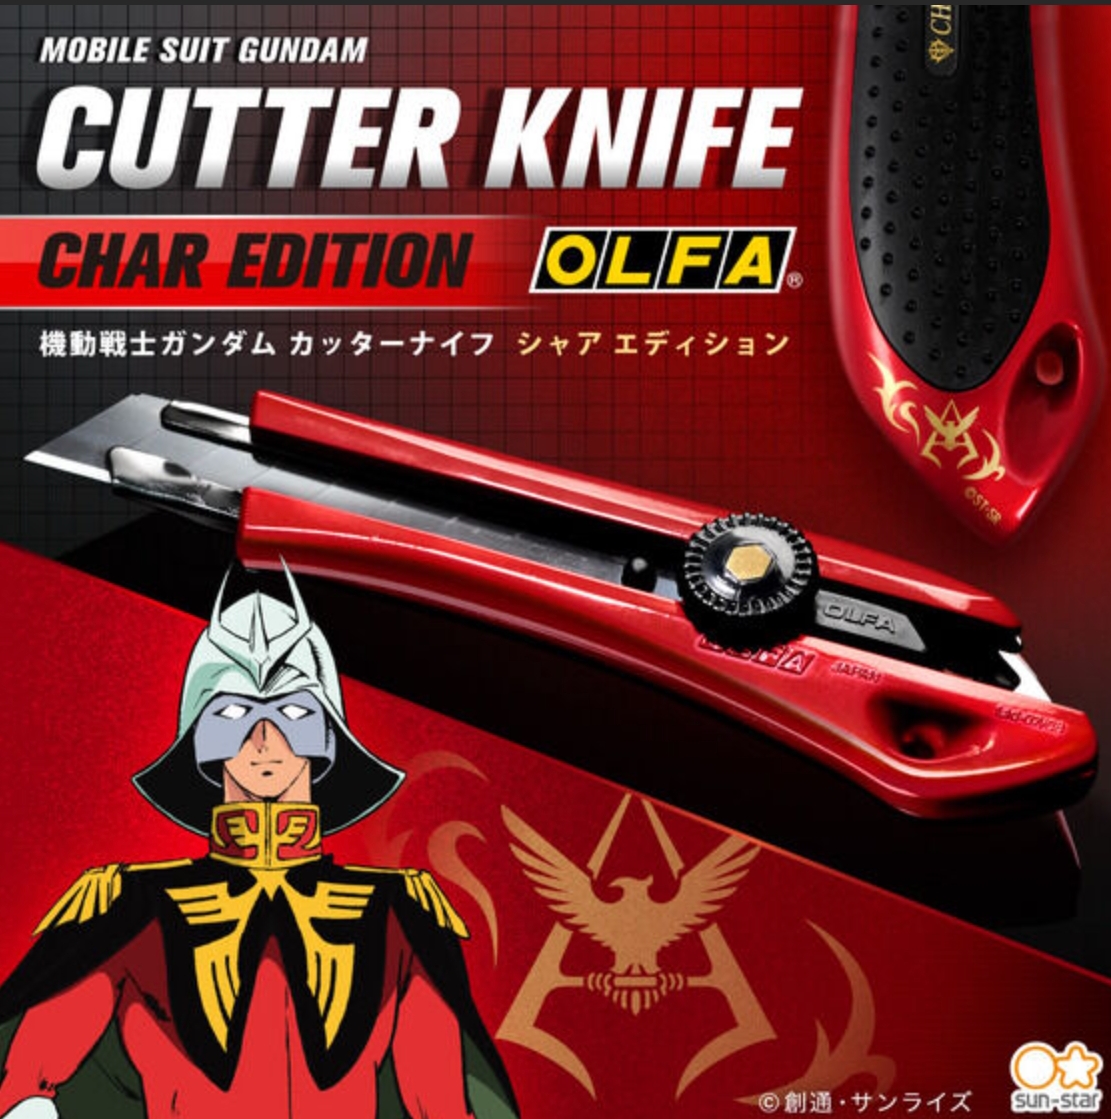 OLFA Partners with Gundam to Release a Char Themed Box Cutter